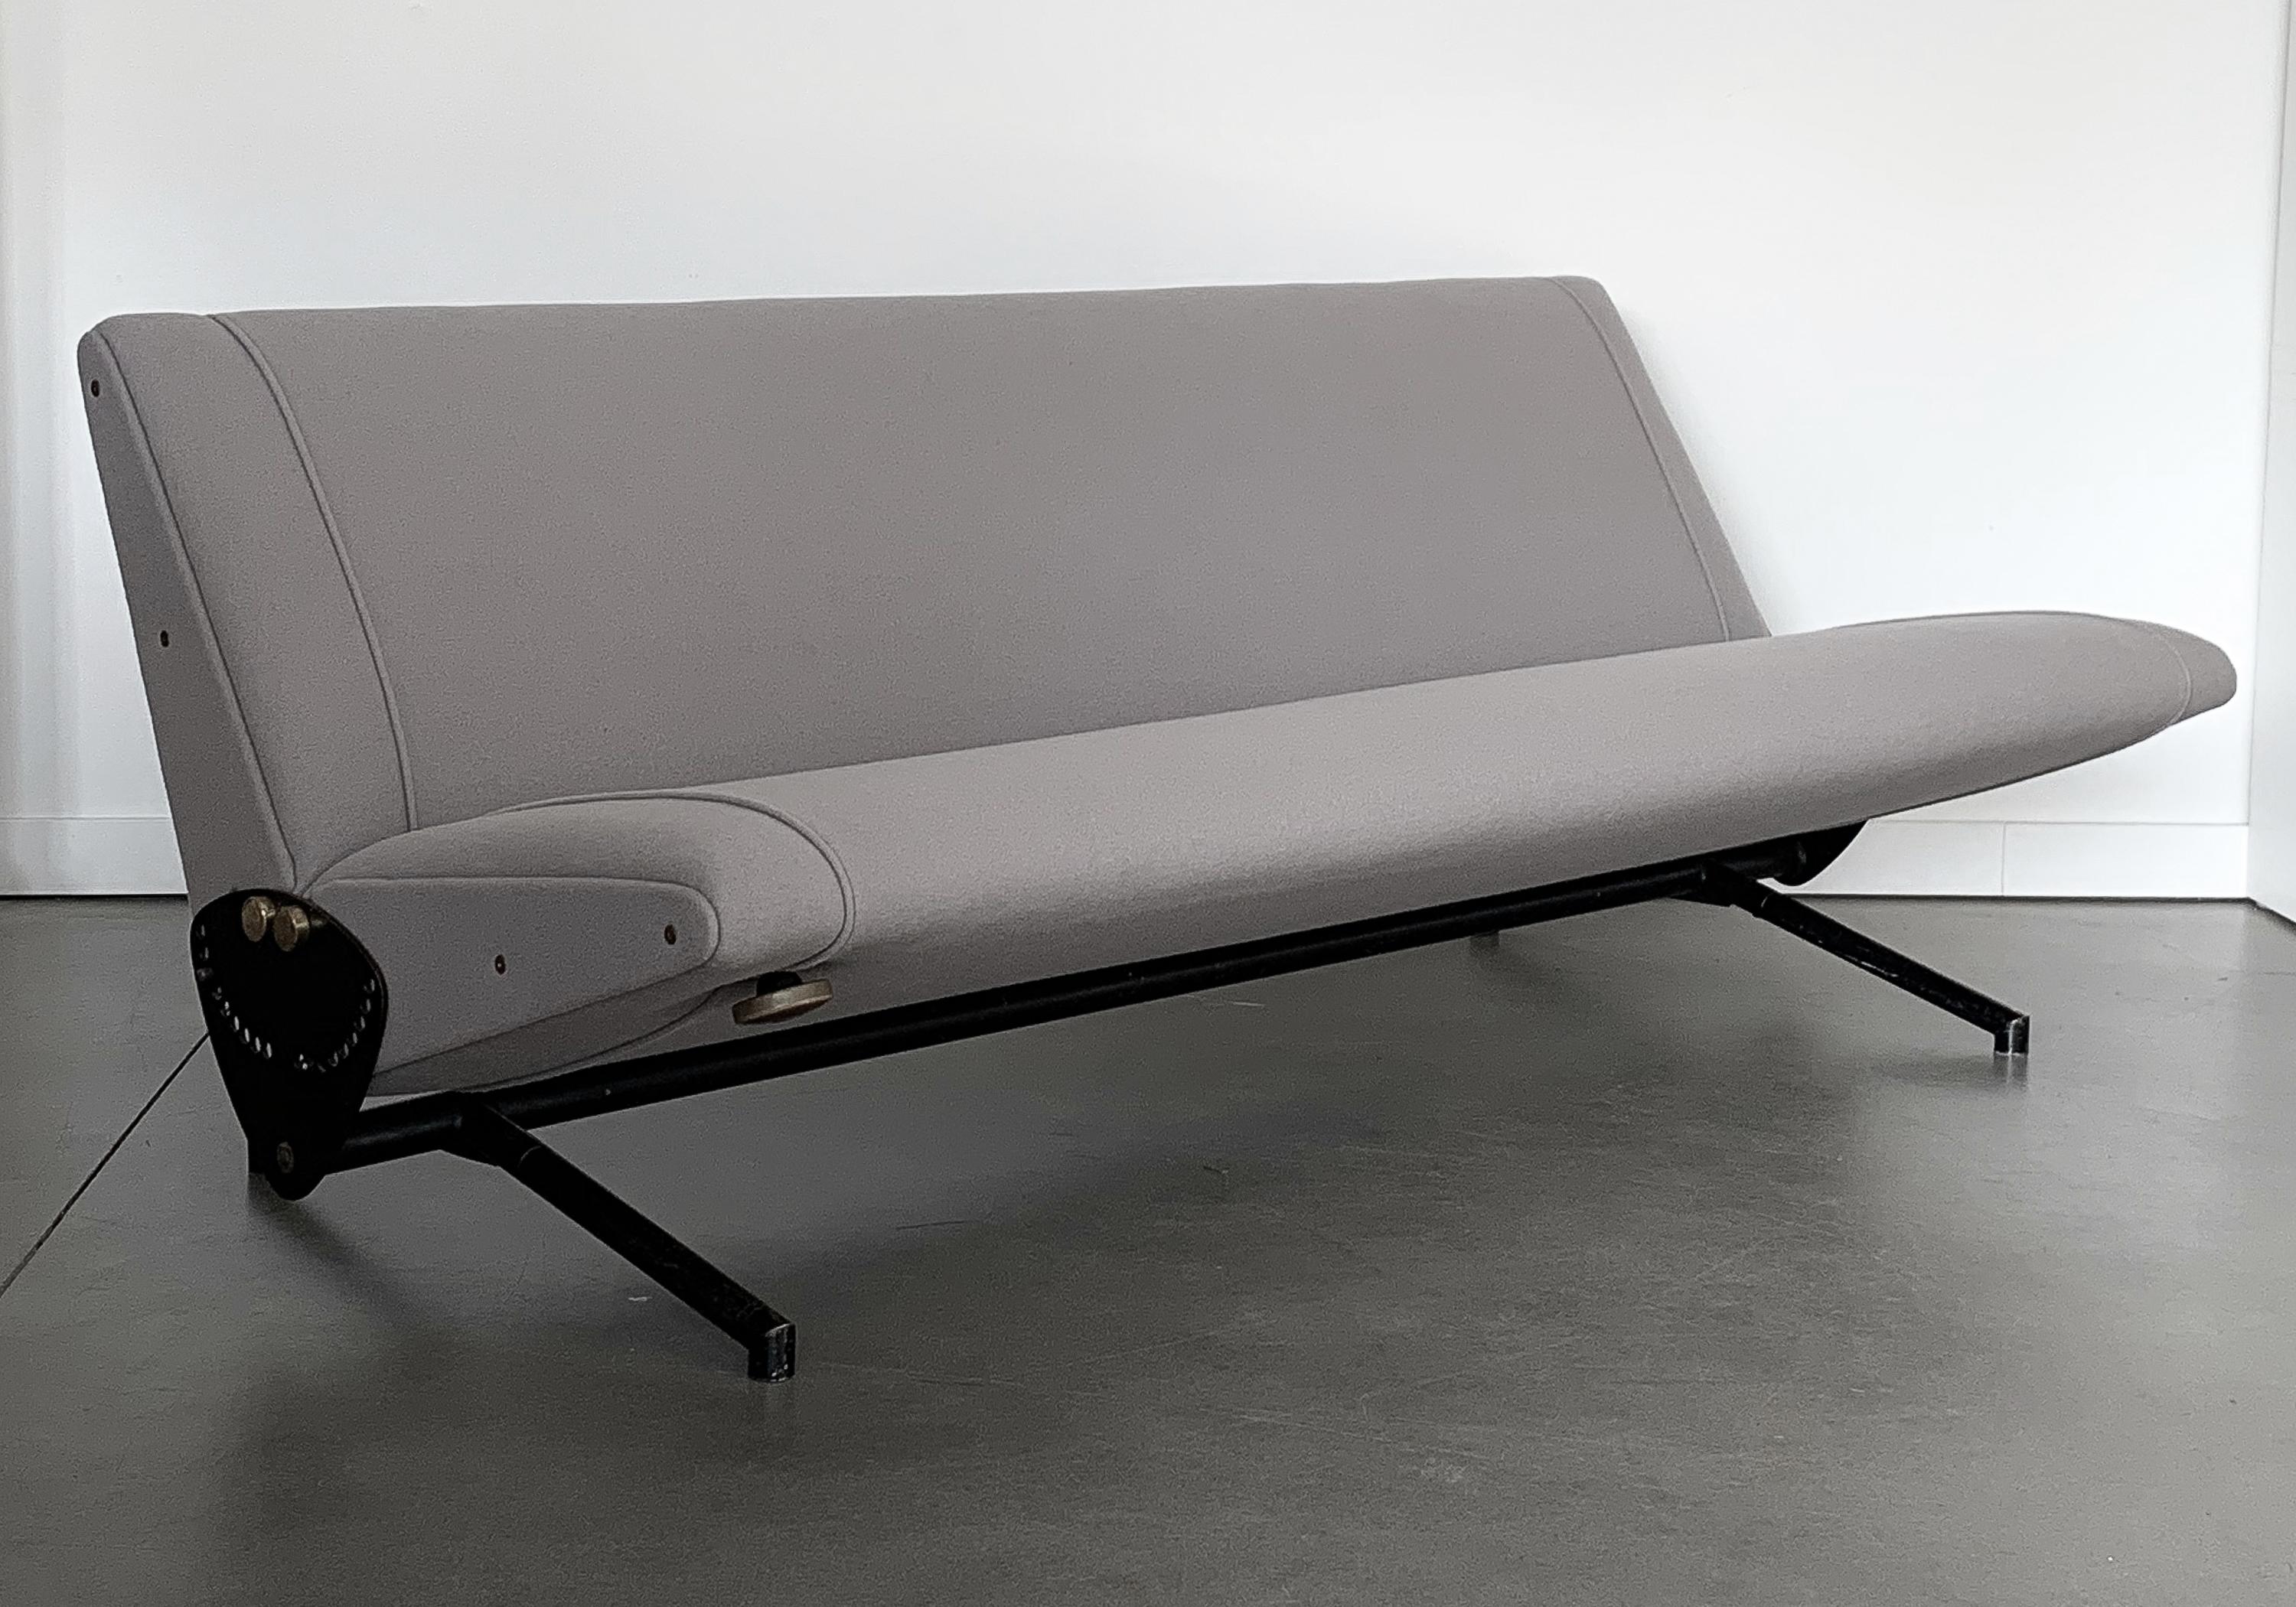 Iconic D70 fully adjustable sofa designed by Osvaldo Borsani for Tecno, circa 1950s. Convertible into a daybed when folded flat. Newly upholstered in a light gray wool fabric by Maharam / Kvadrat with new foam throughout. The base is black enameled